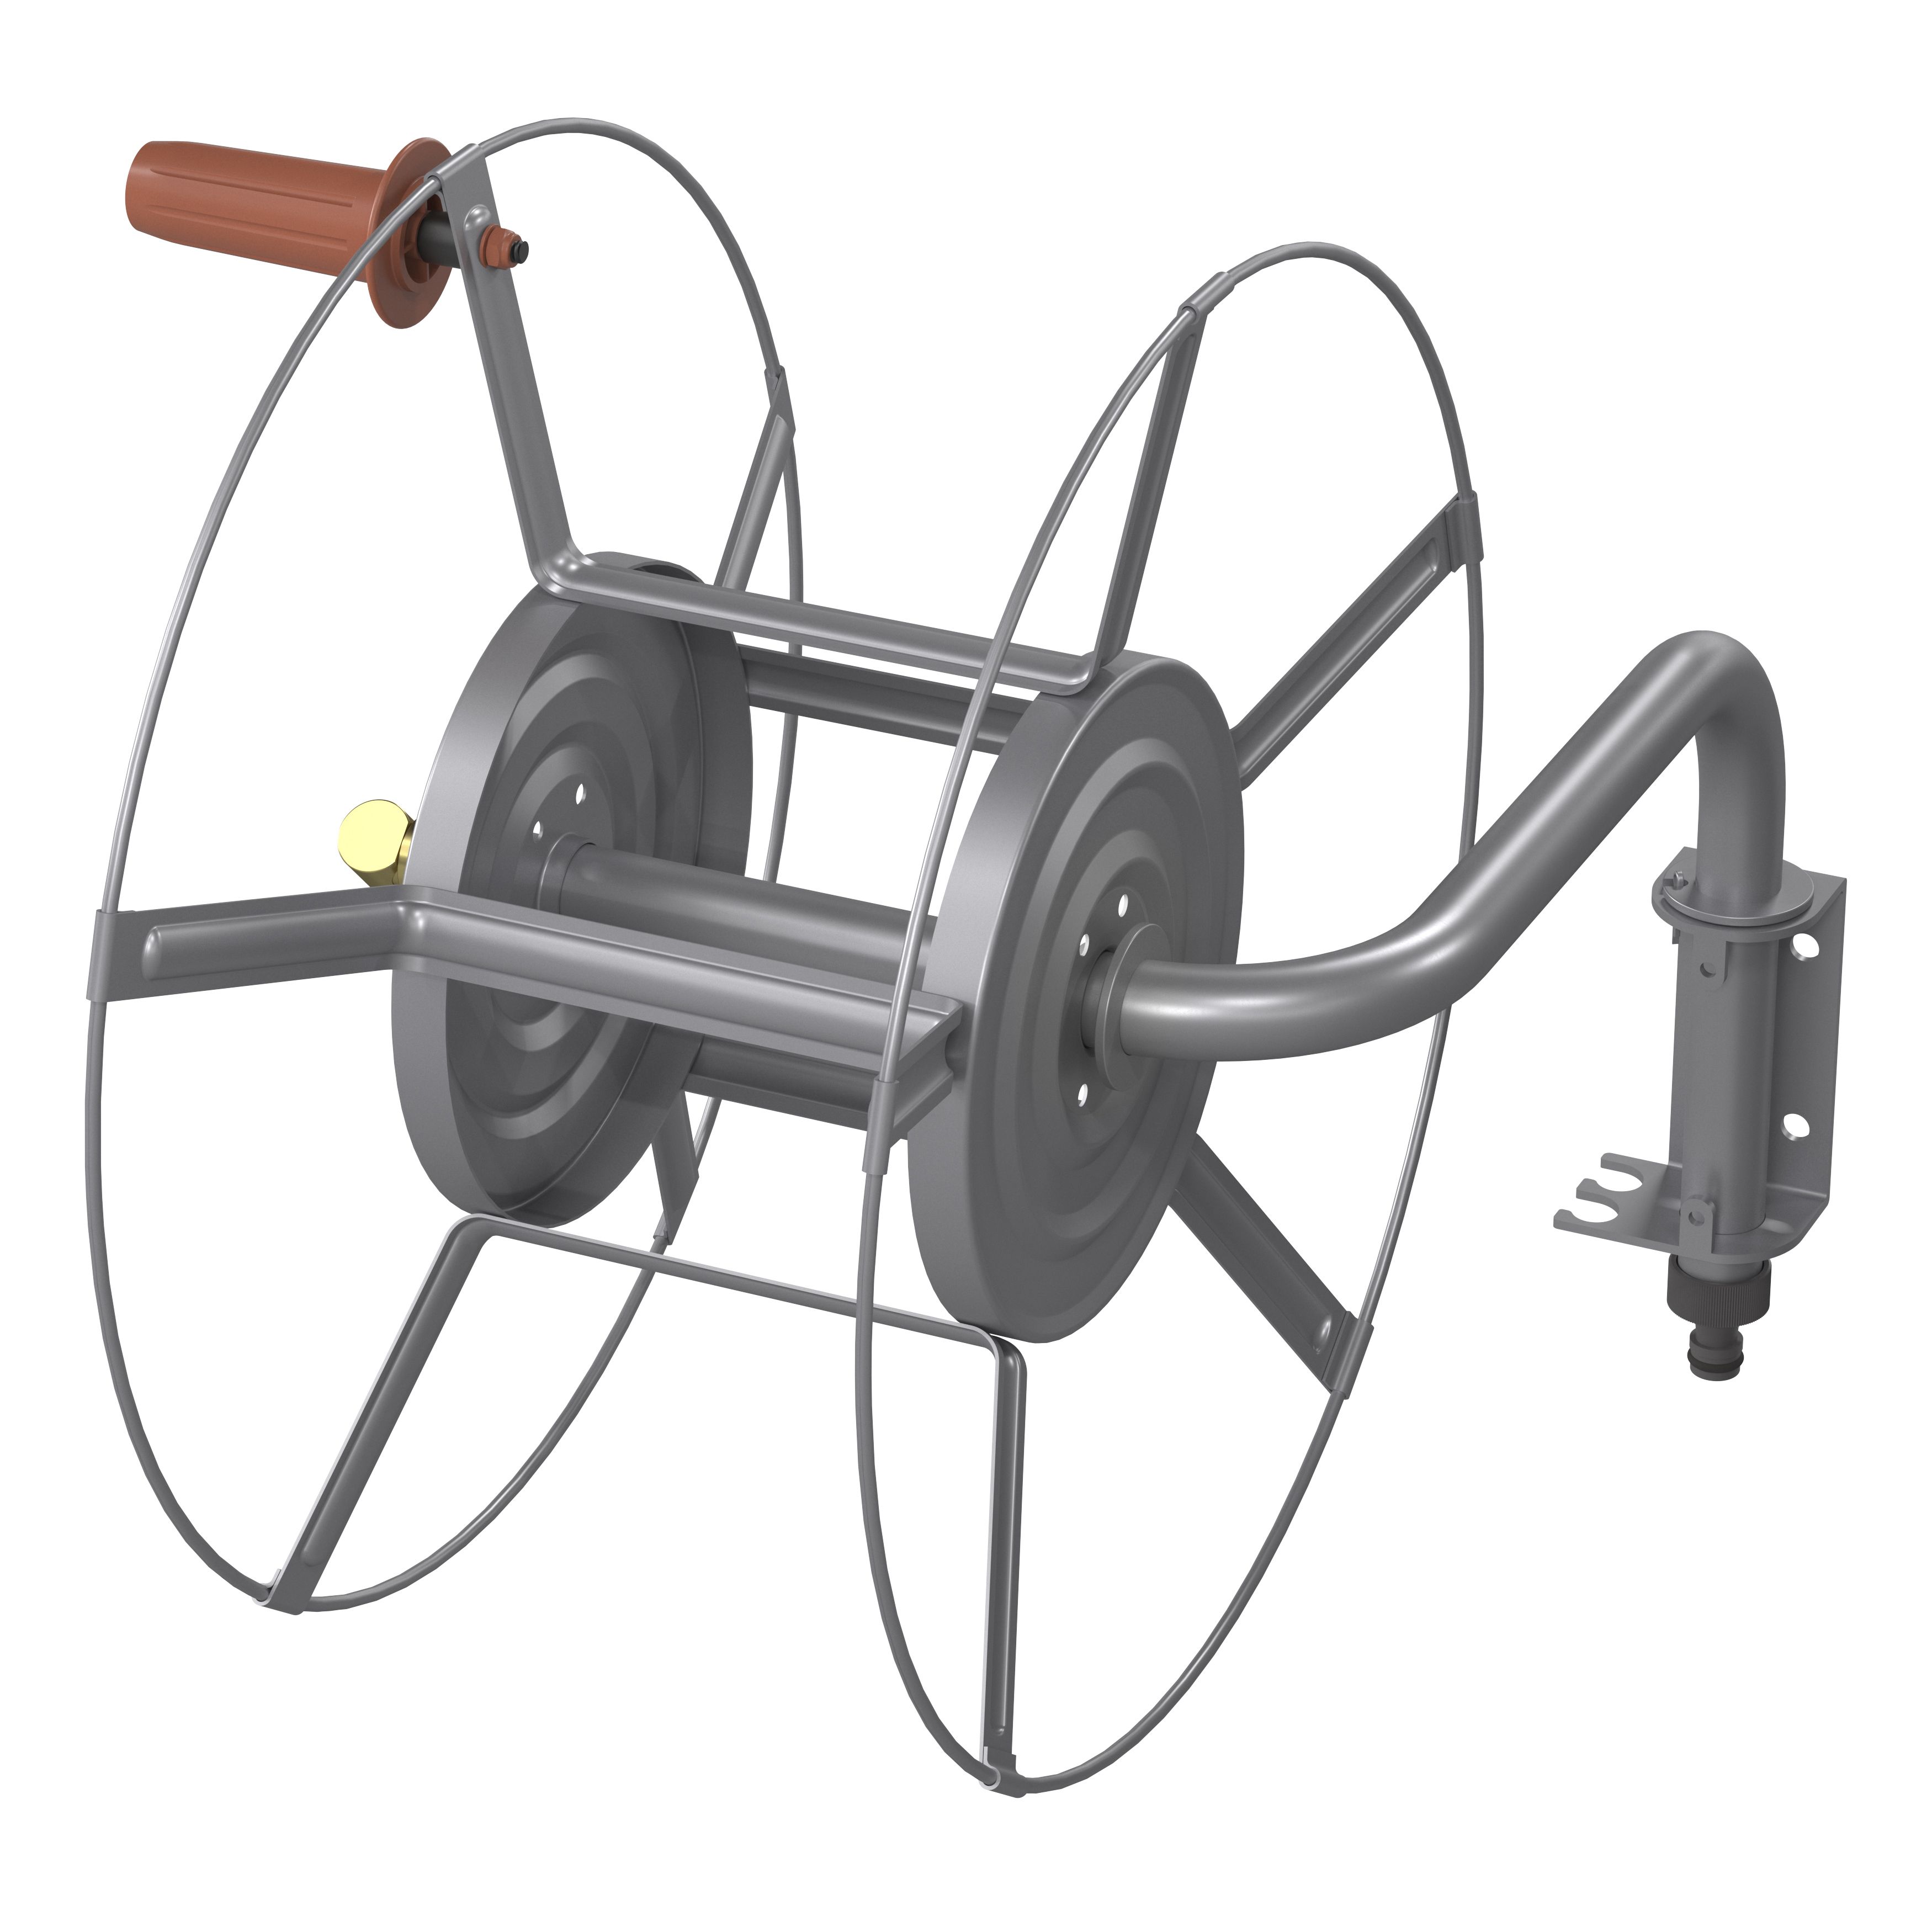 Utility wall mounted metal hose reel for Gardens & Irrigation 